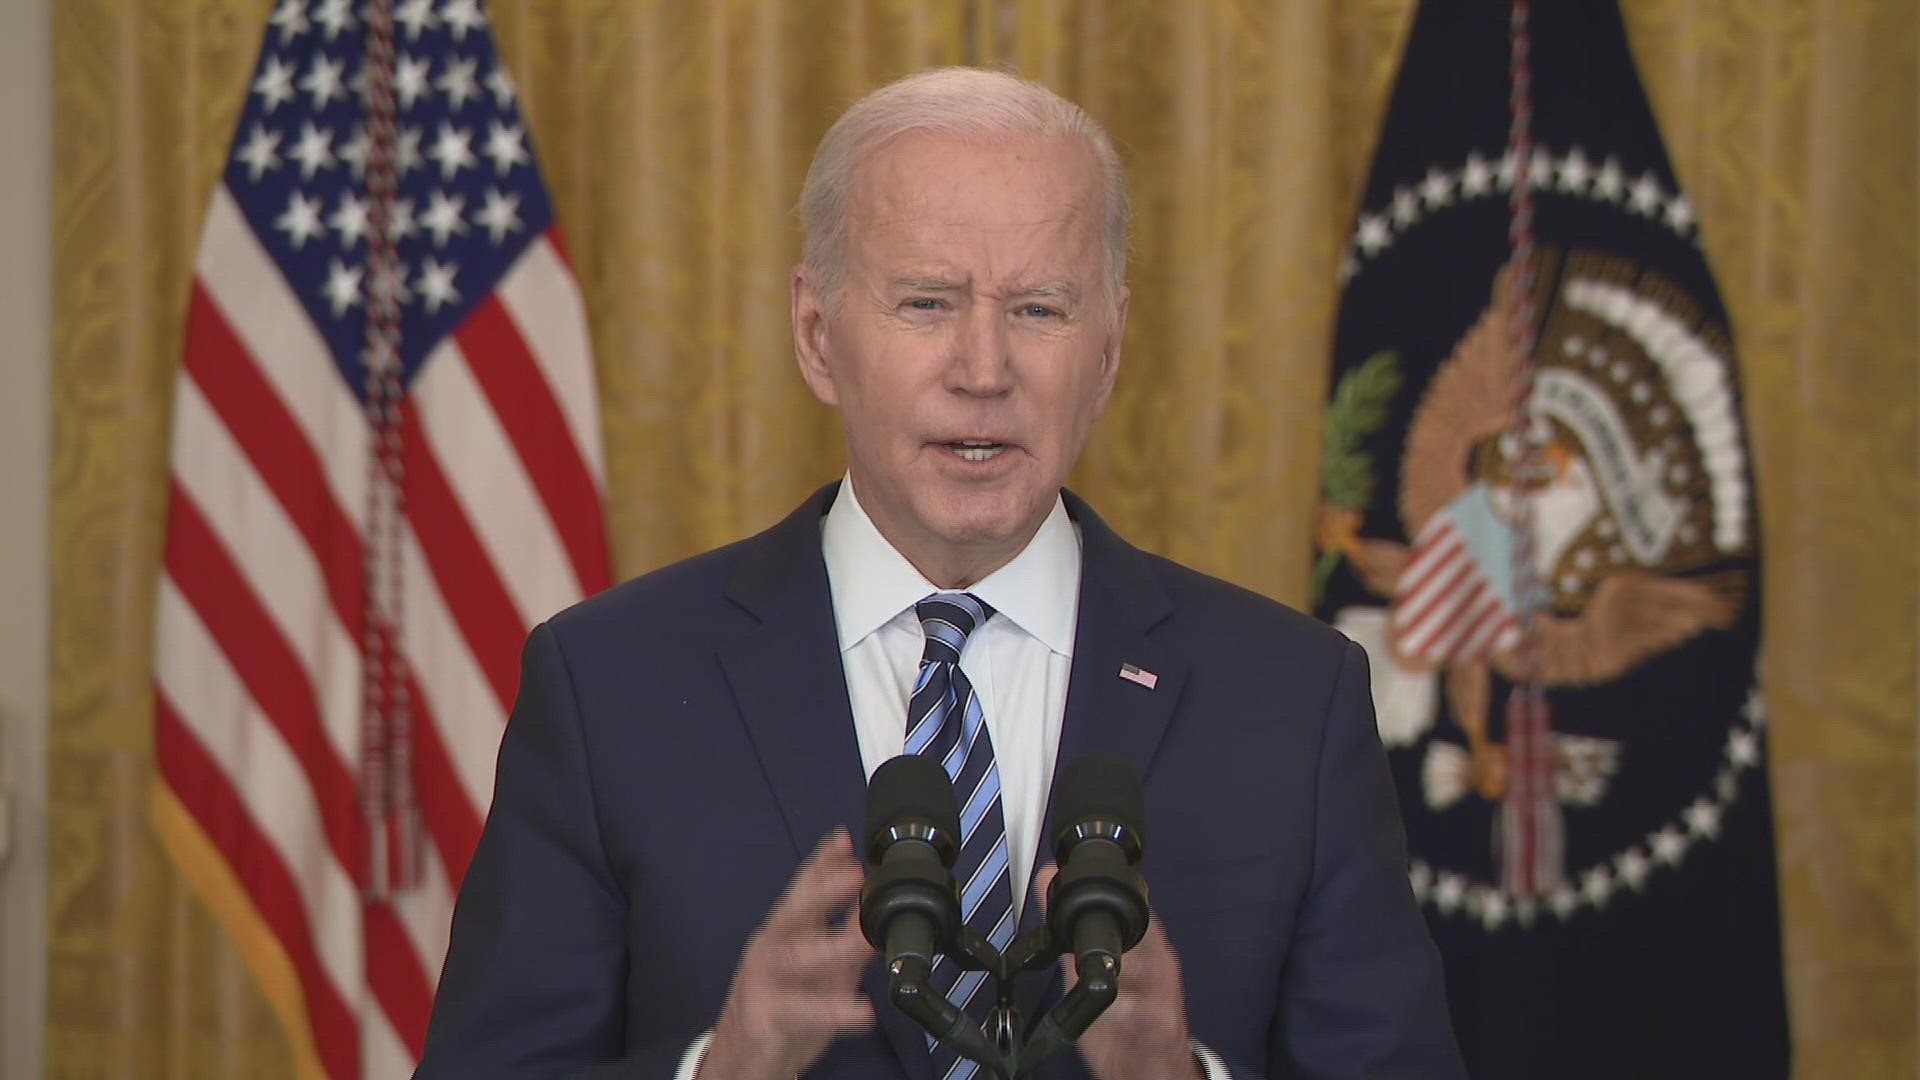 President Biden said Russian President Vladimir Putin rejected every "good faith" effort the U.S. and its allies made to avoid conflict in Ukraine.